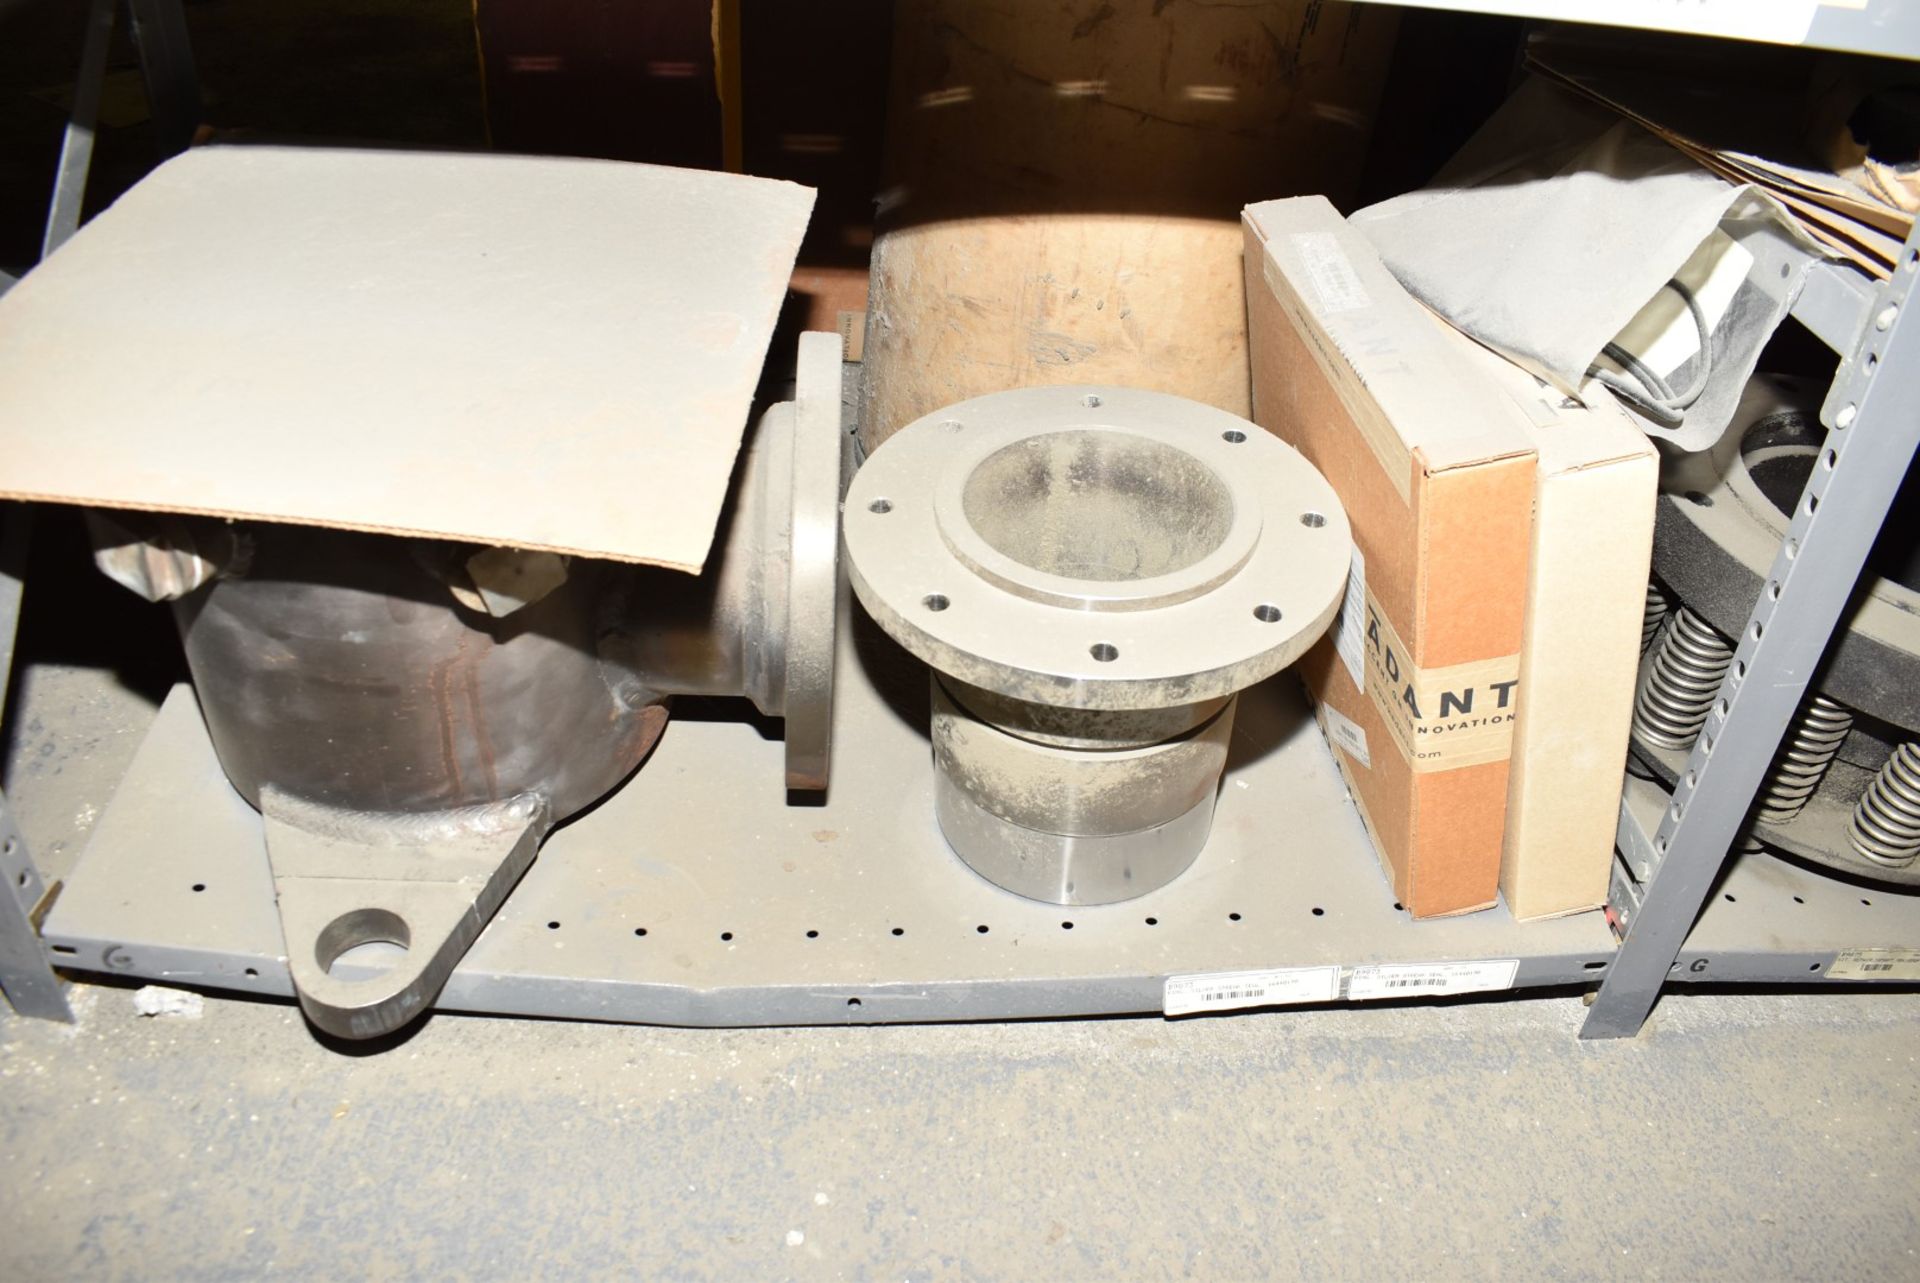 LOT/ CONTENTS OF SHELF - INCLUDING FLEX COUPLINGS, SLITTER BLADES, SPARE PARTS [RIGGING FEES FOR LOT - Image 5 of 5